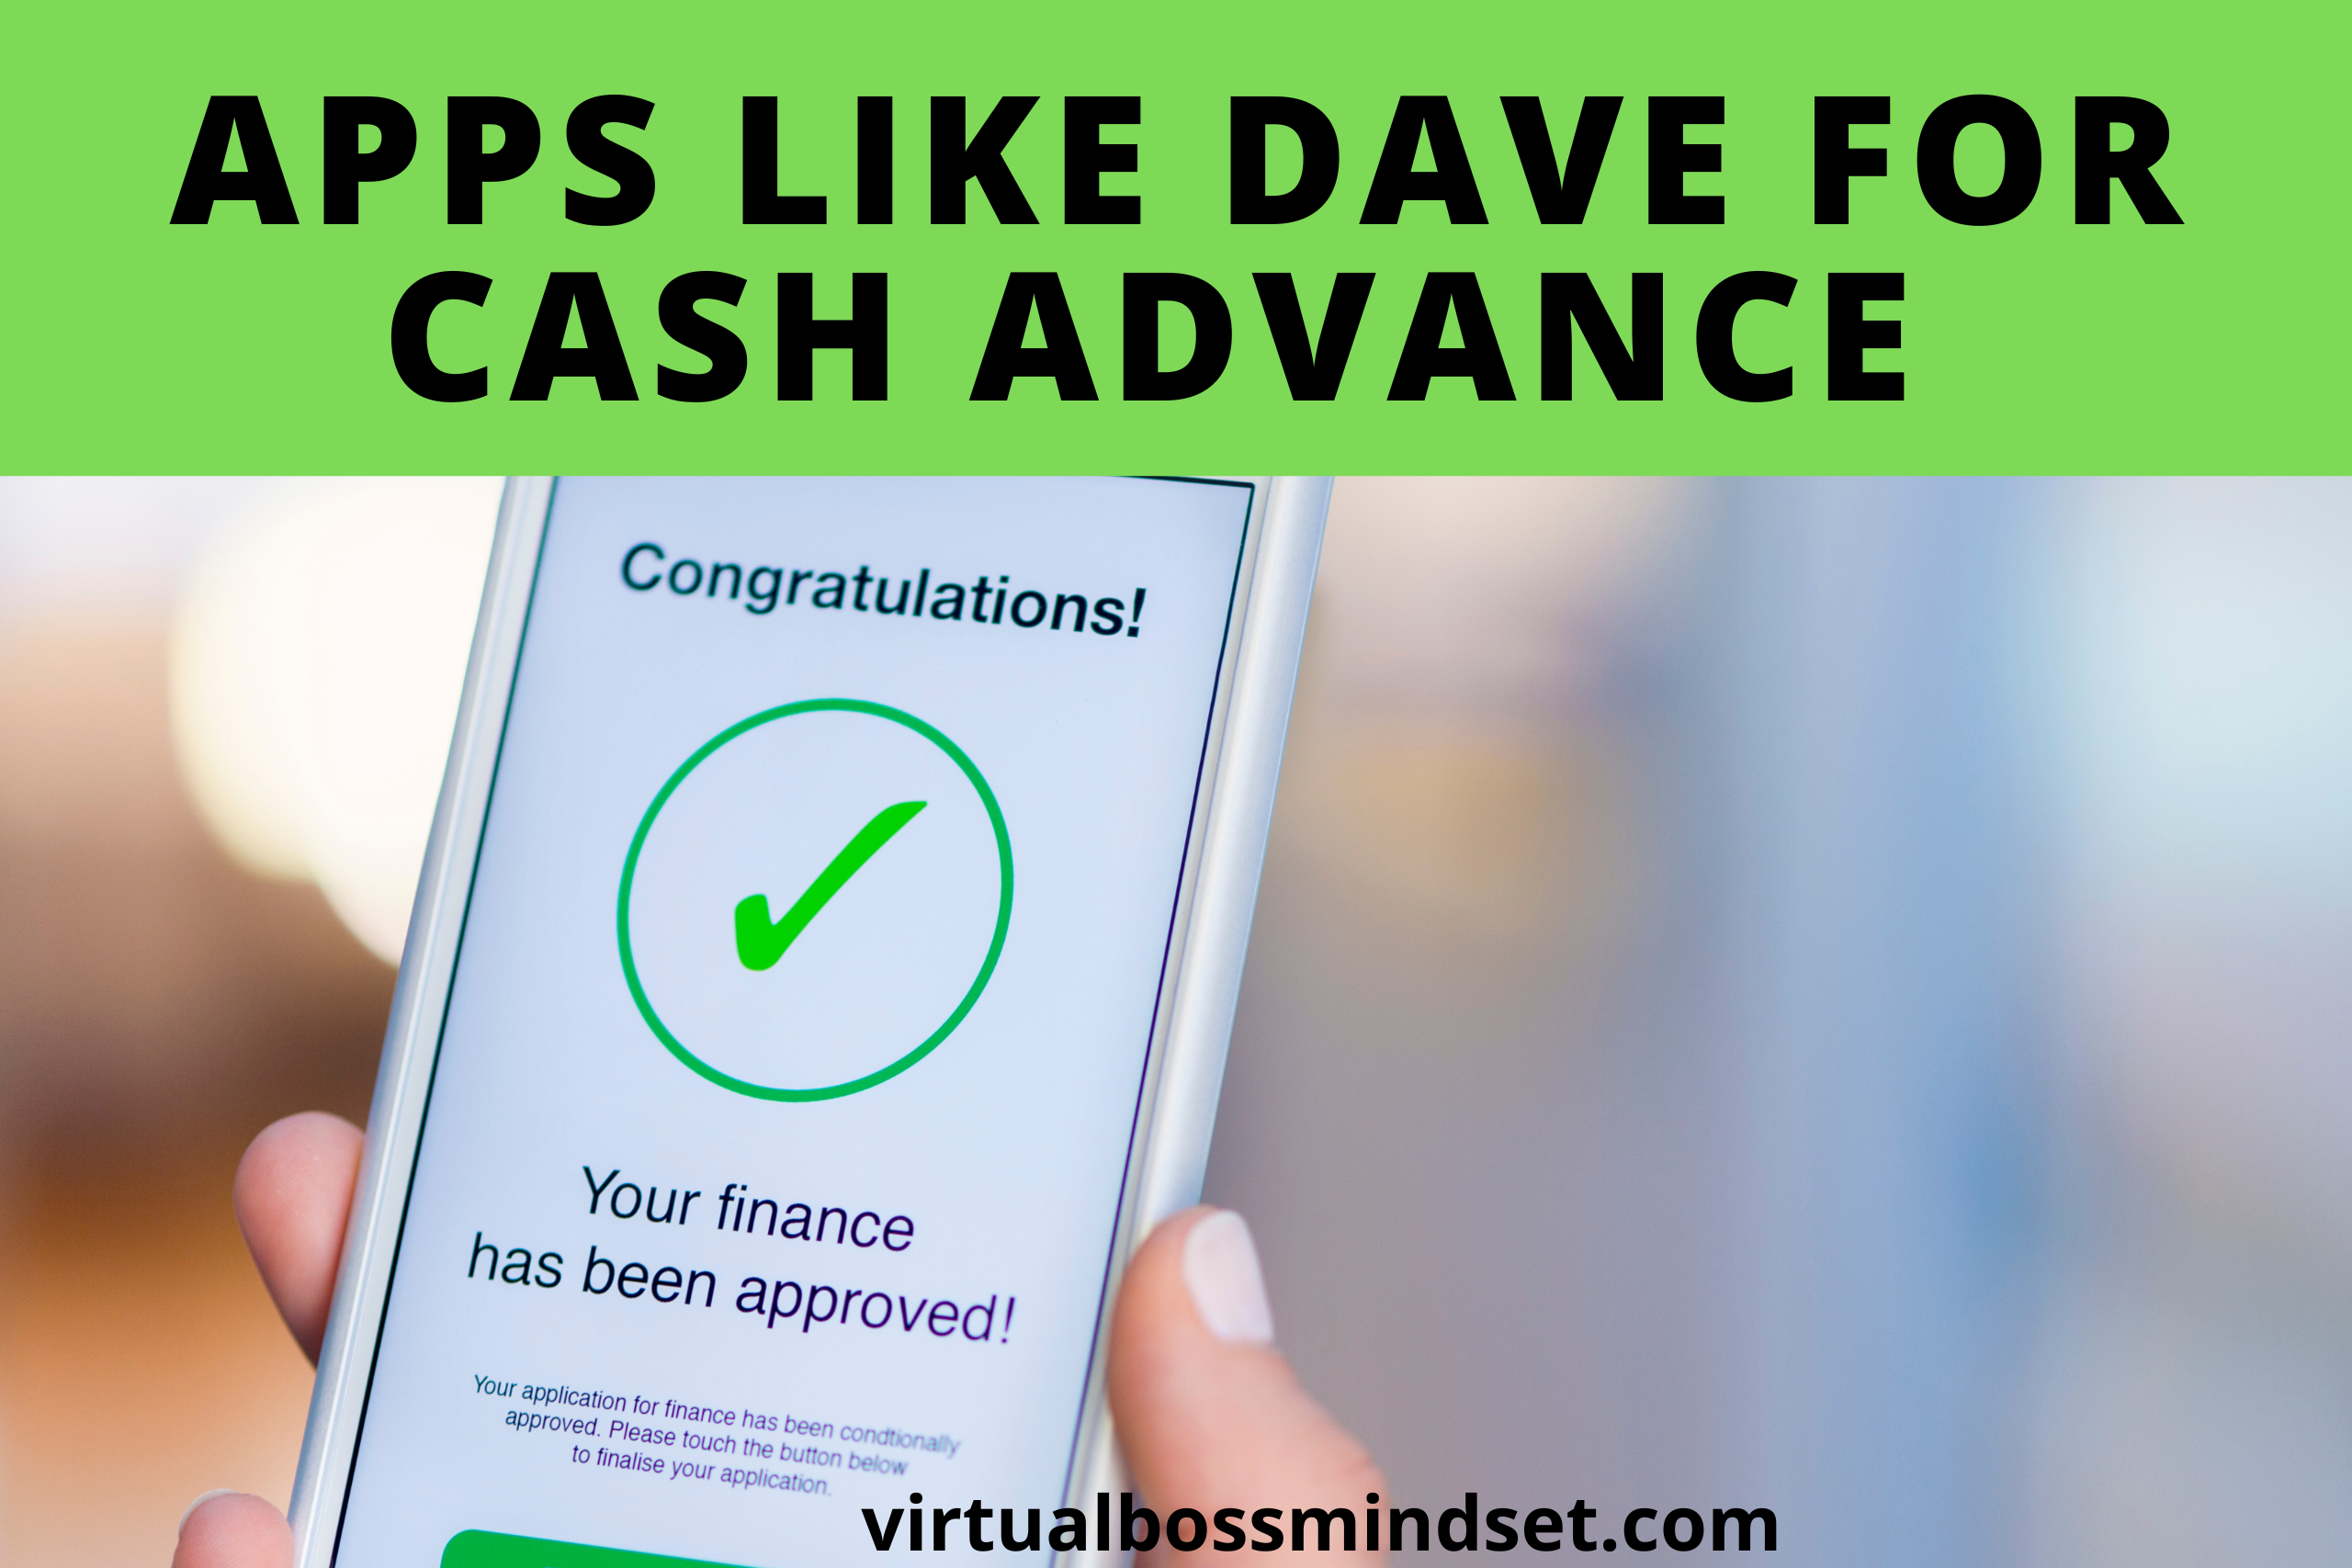 14 Apps like Dave For Cash Advance and Payday Loans